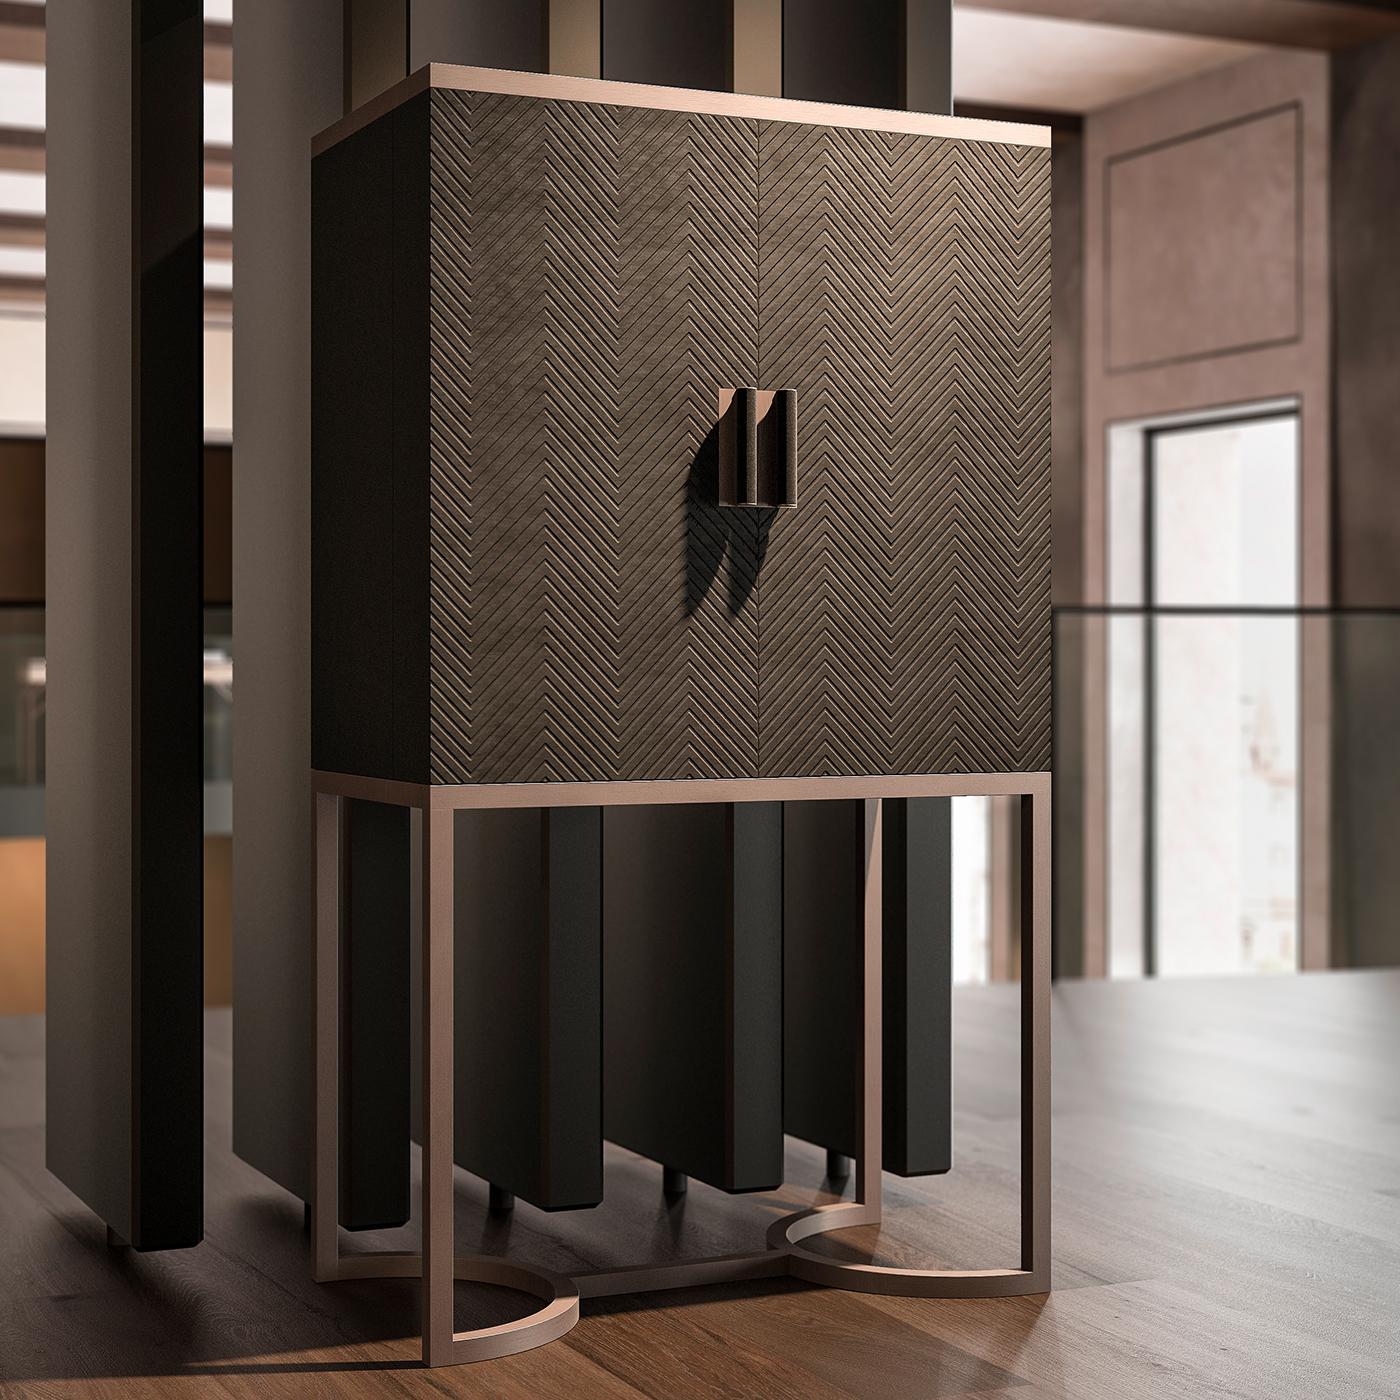 The dragonfly bar cabinet is elegant and stylish in design and features unique velvet lacquered doors with an engraved design. Perfect for storing your drinks of choice and exclusive glassware, the cabinet sits on a uniquely formed metal base for